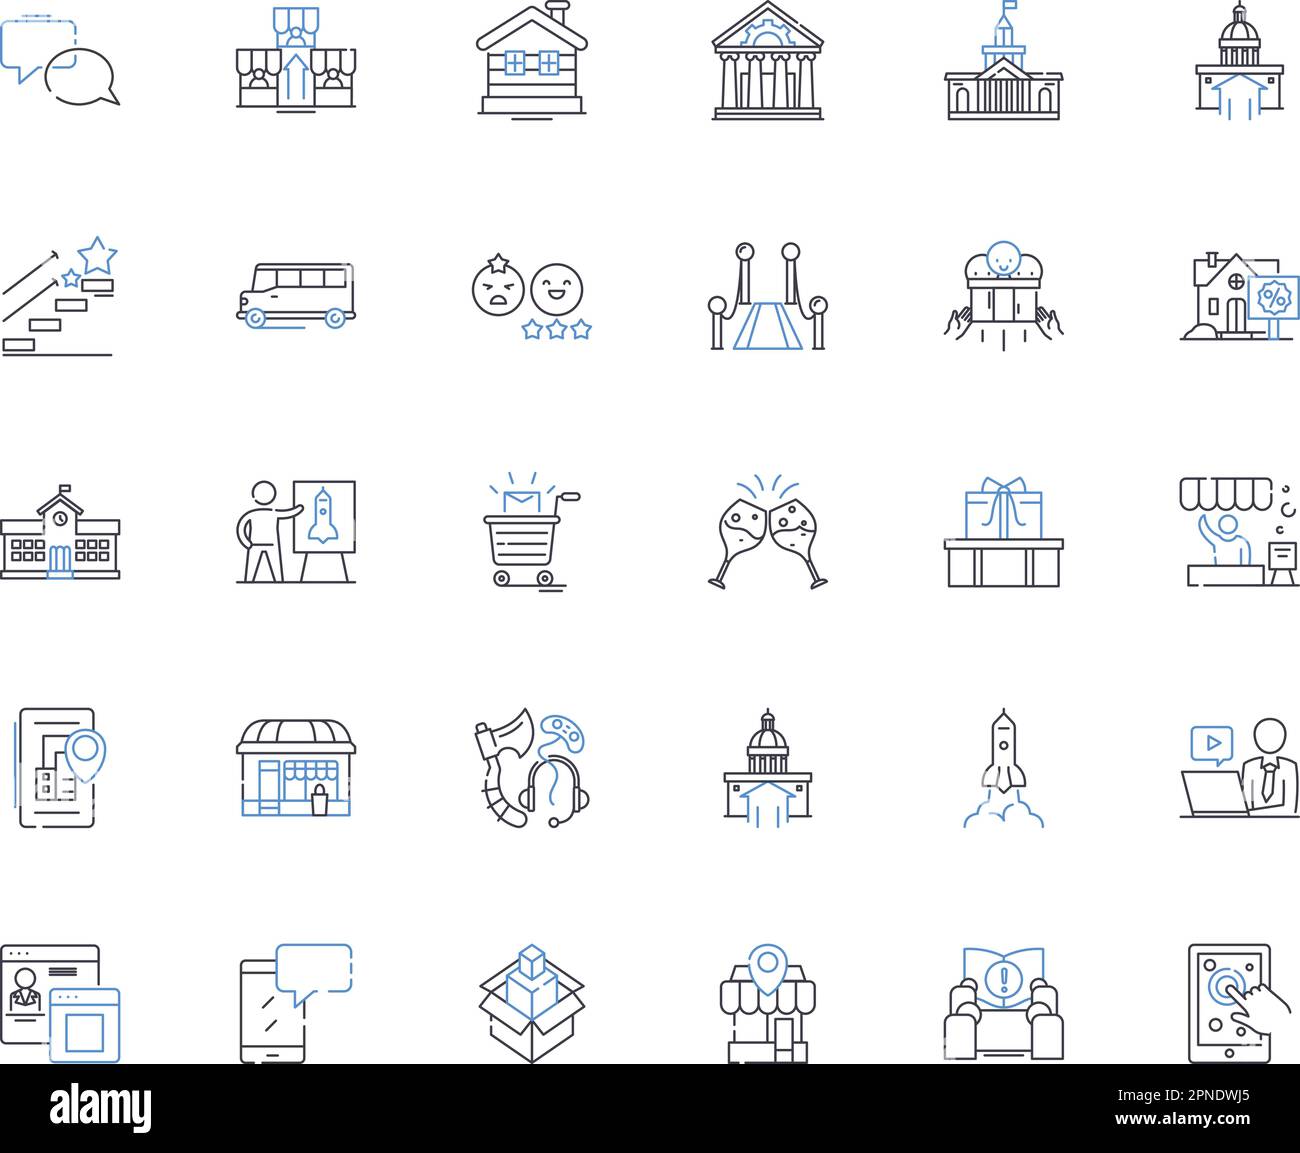 Urban line icons collection. Graffiti, Concrete, Skyscrapers, Alleyways, Streetlights, Traffic, Noise vector and linear illustration. Pollution Stock Vector